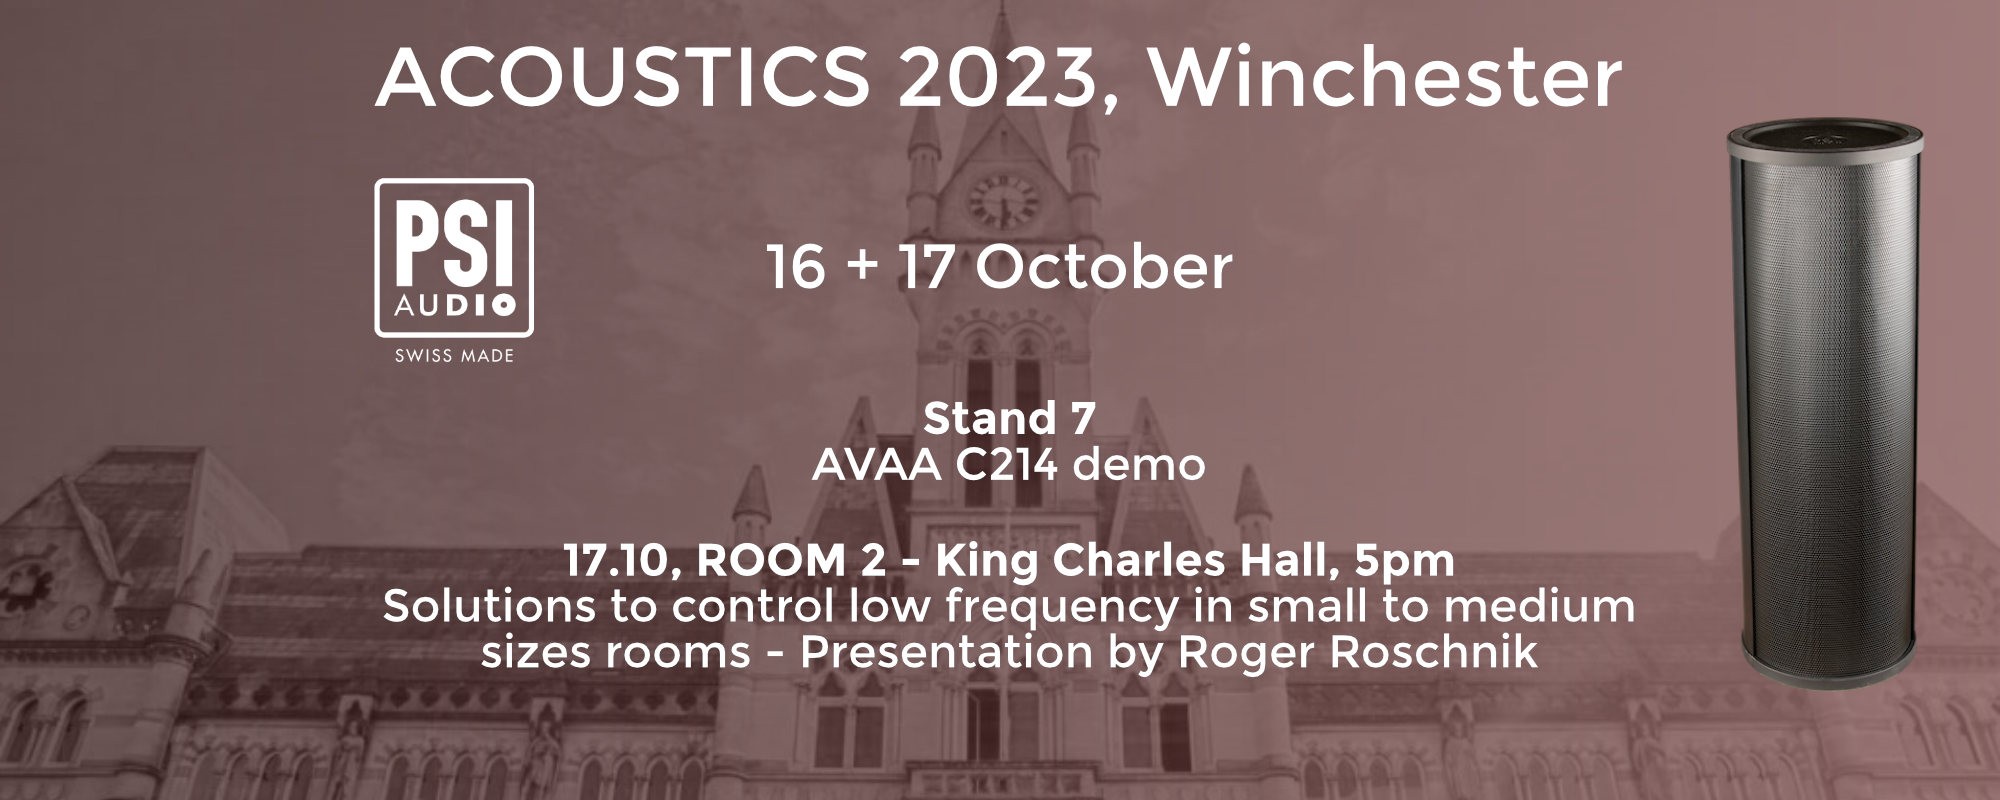 AVAA C214 @ Acoustics 2023 in Winchester, UK